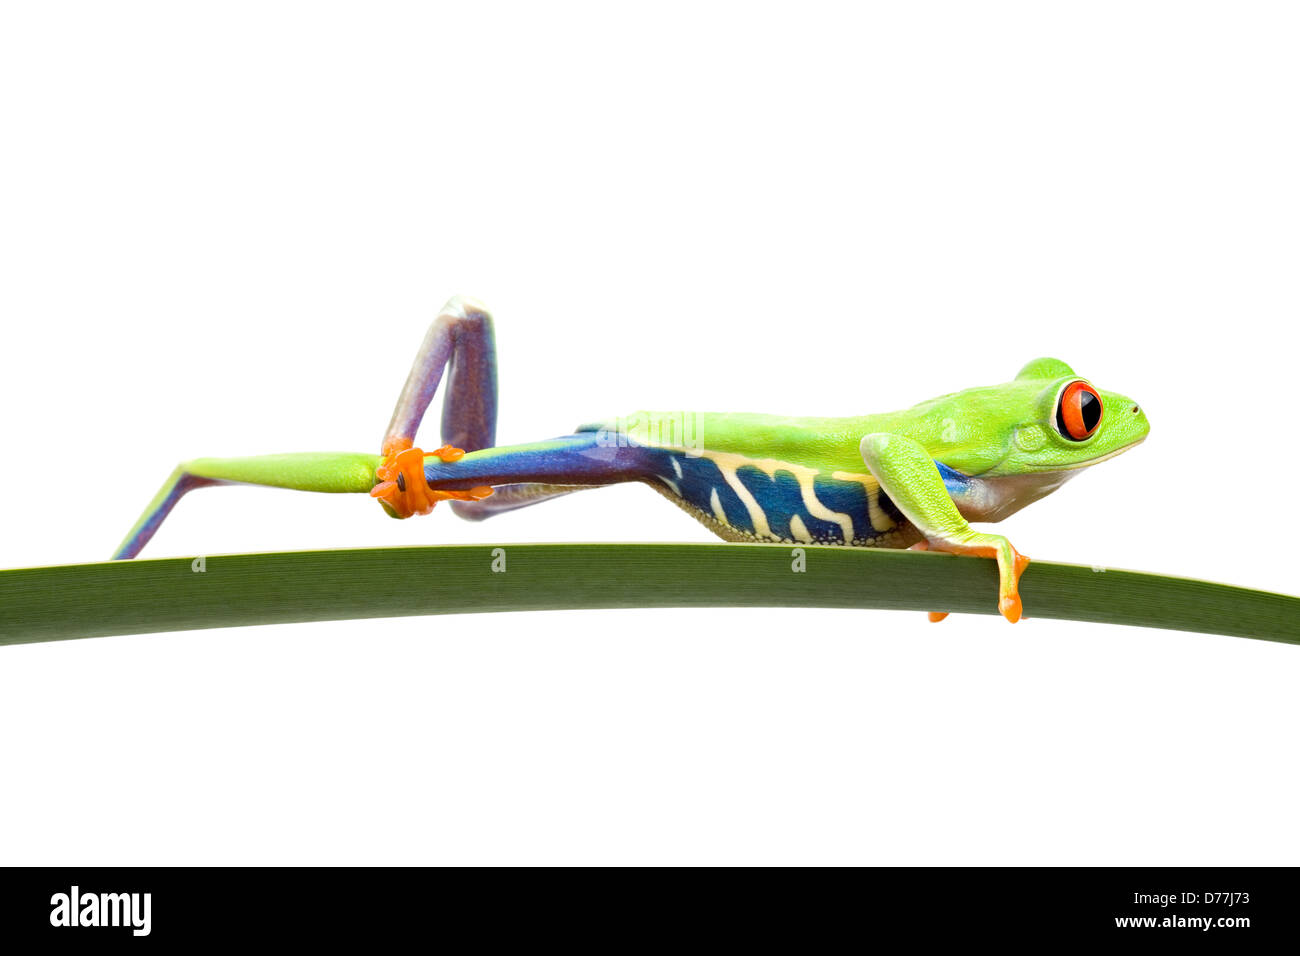 Nettoyage de la grenouille sa jambe sur une jambe, isolated on white Banque D'Images